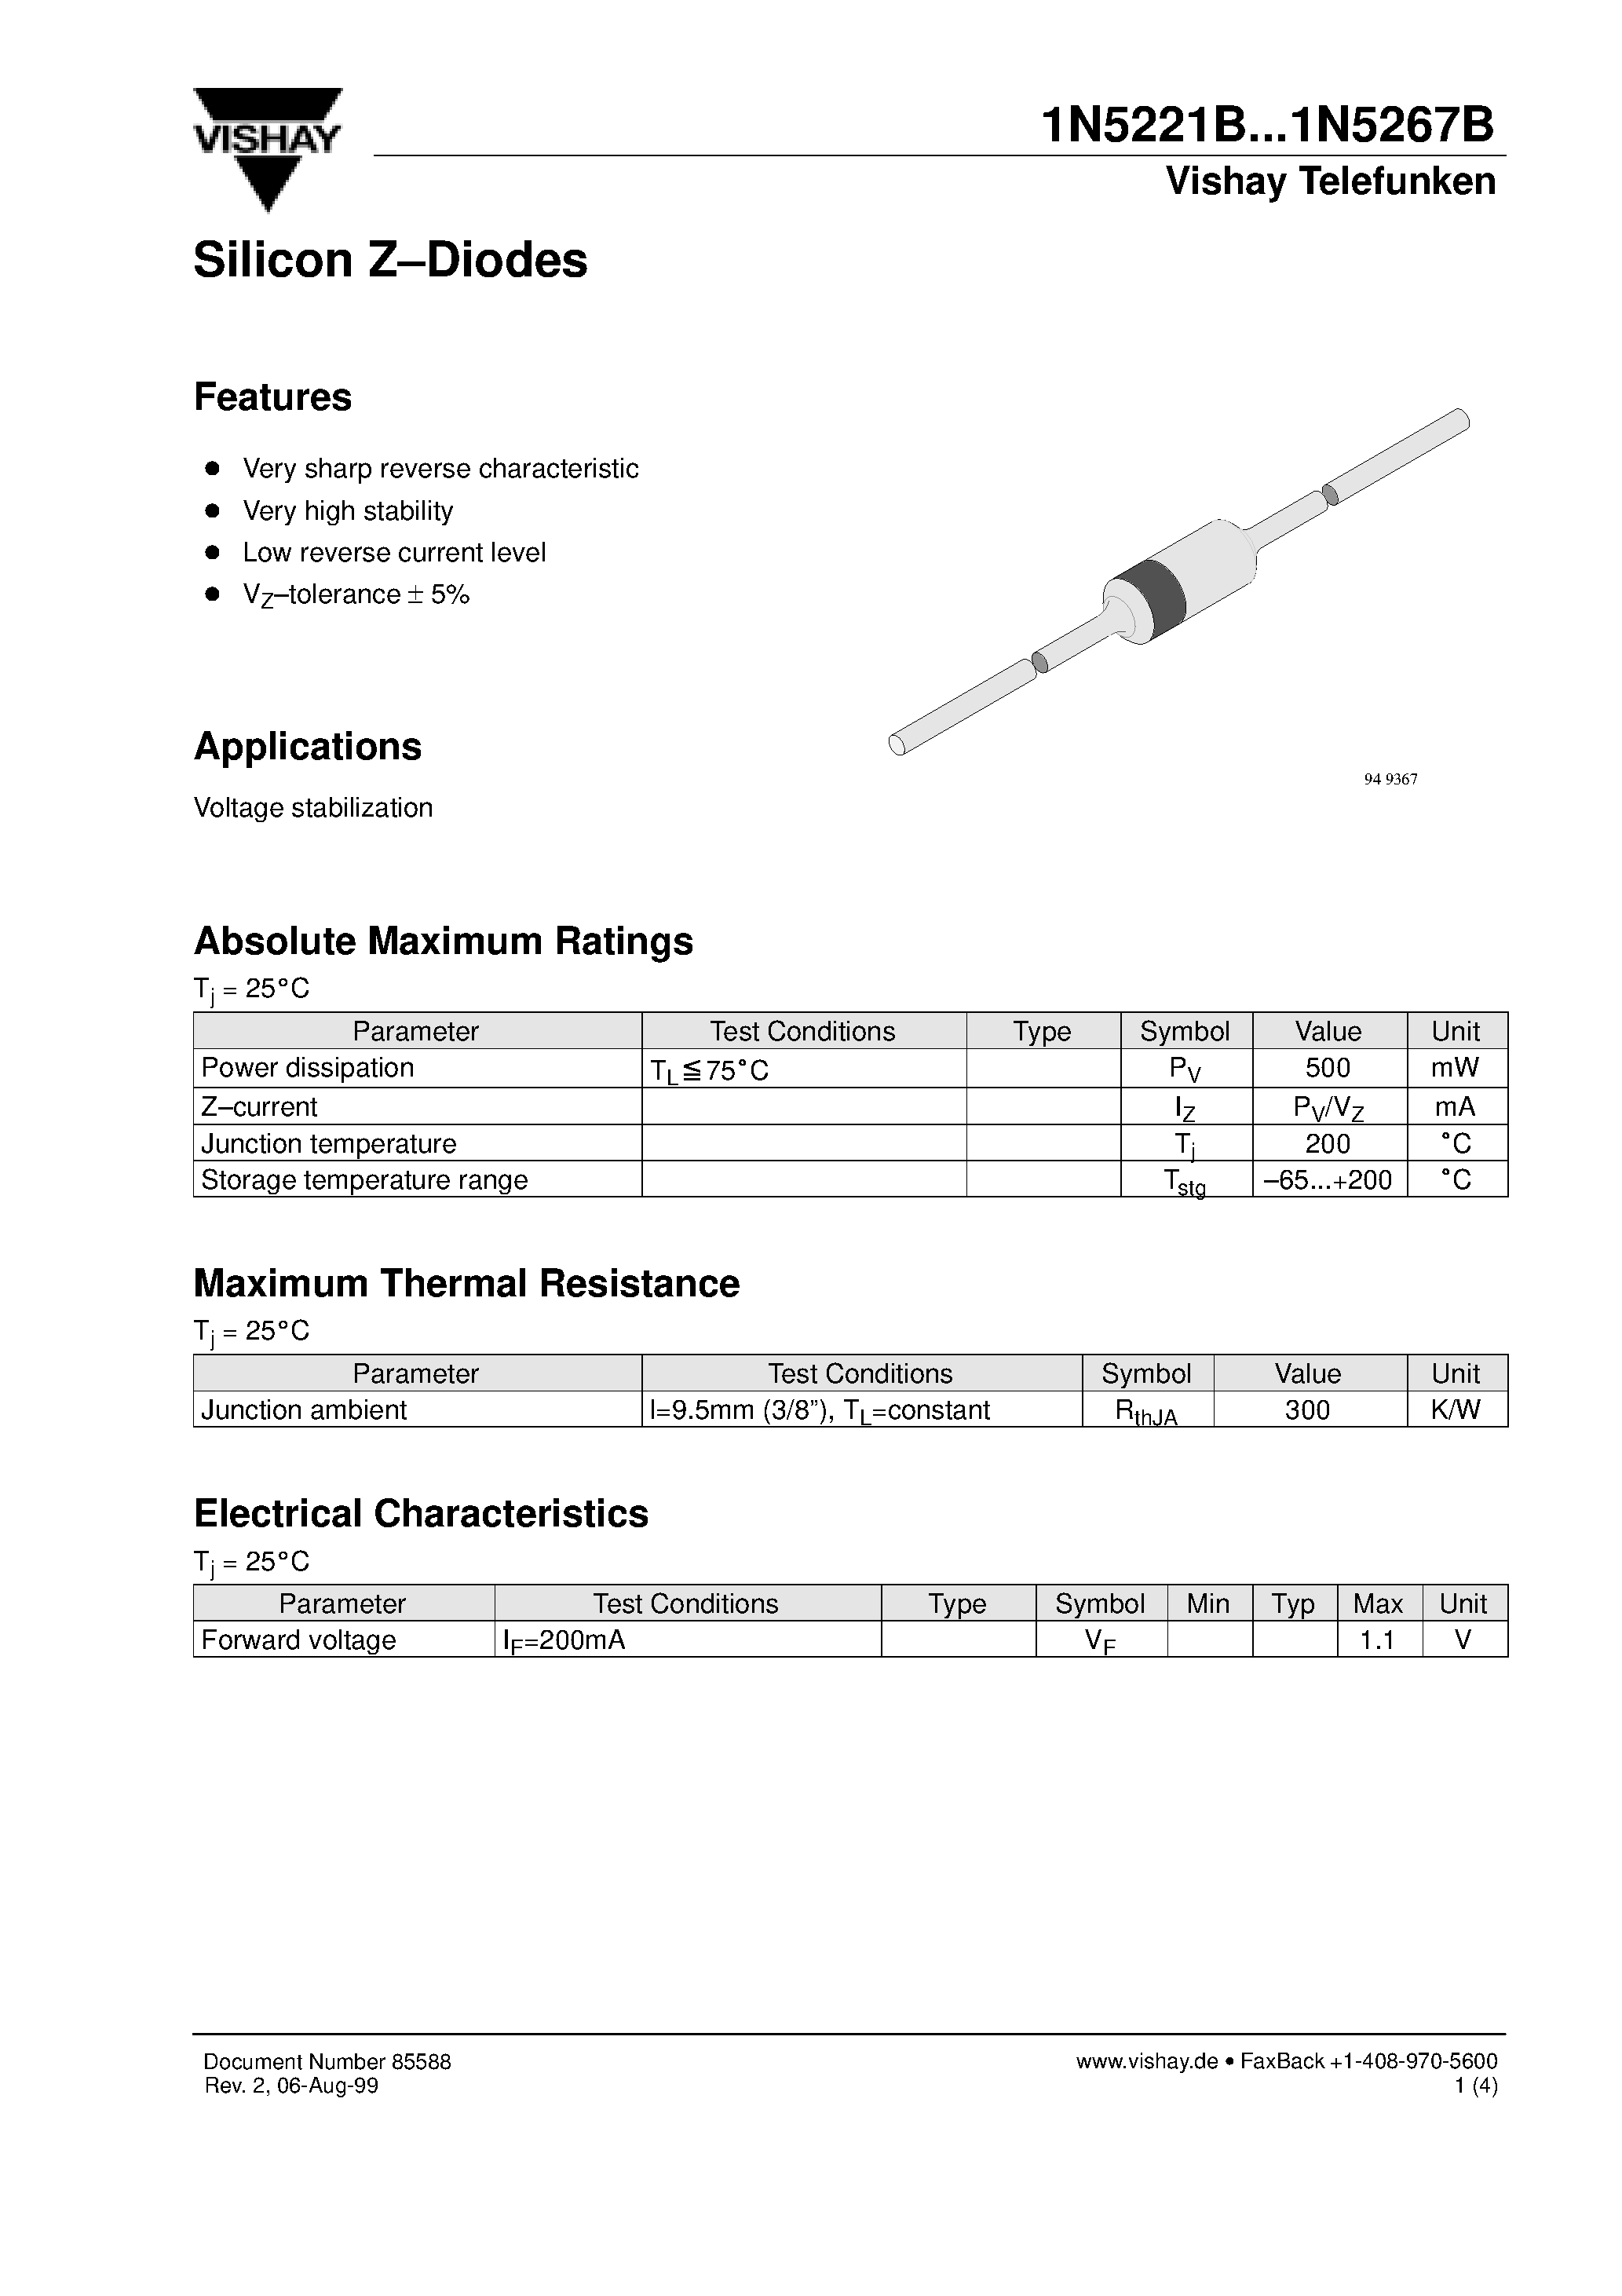 Datasheet 1N5238B - Silicon Z-Diodes page 1